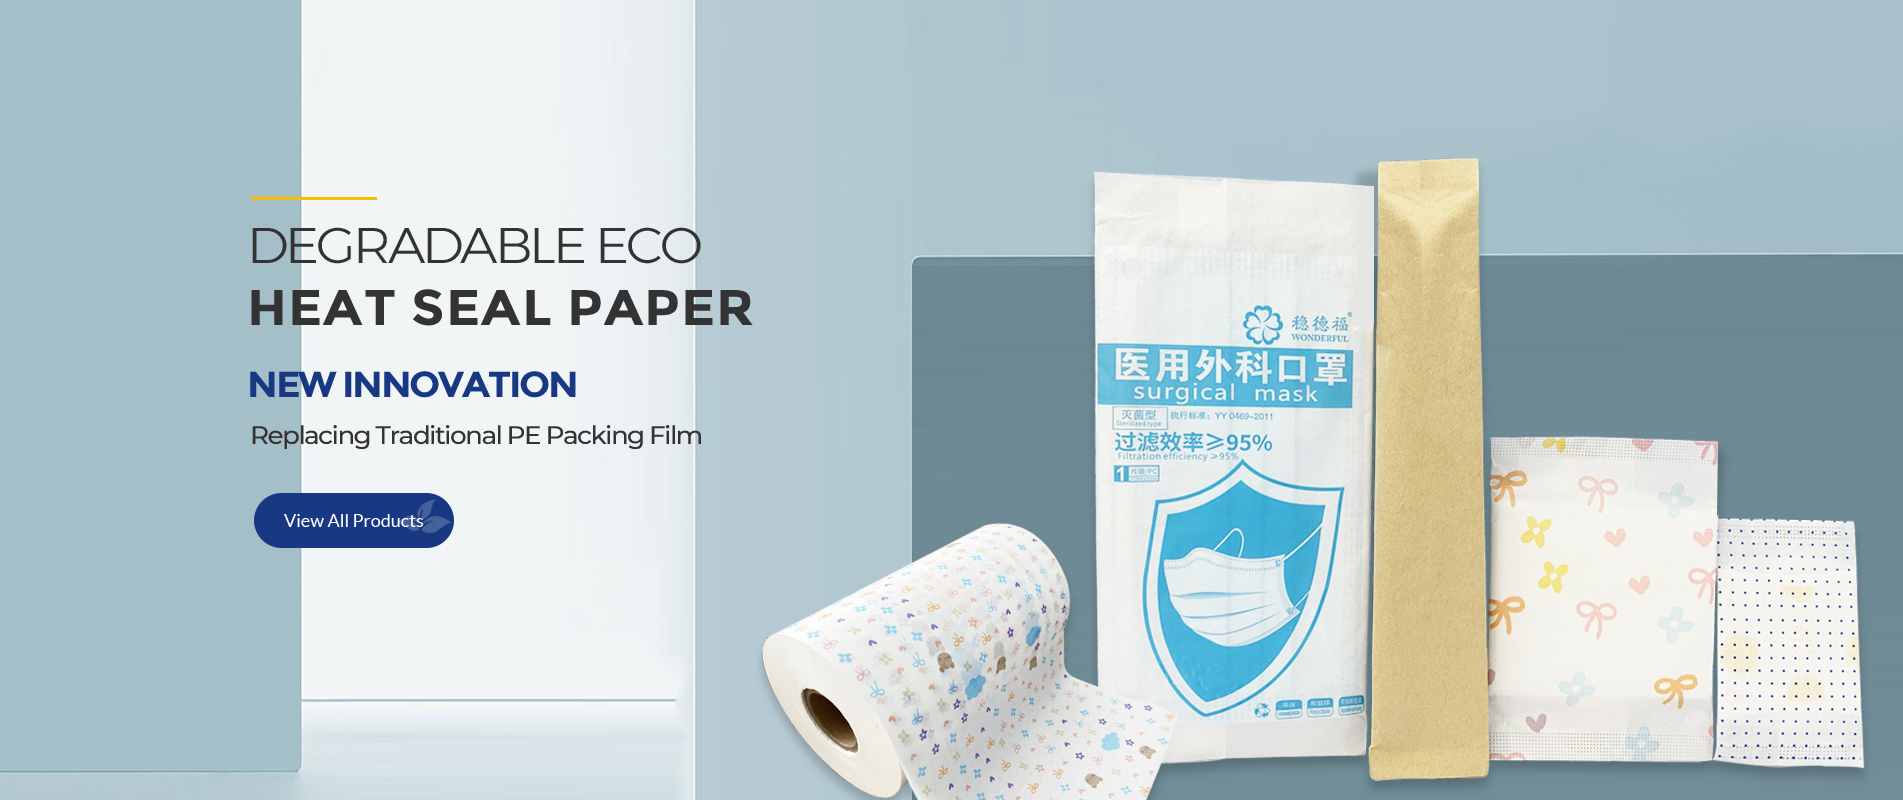 Heat Sealable Paper Manufacturer